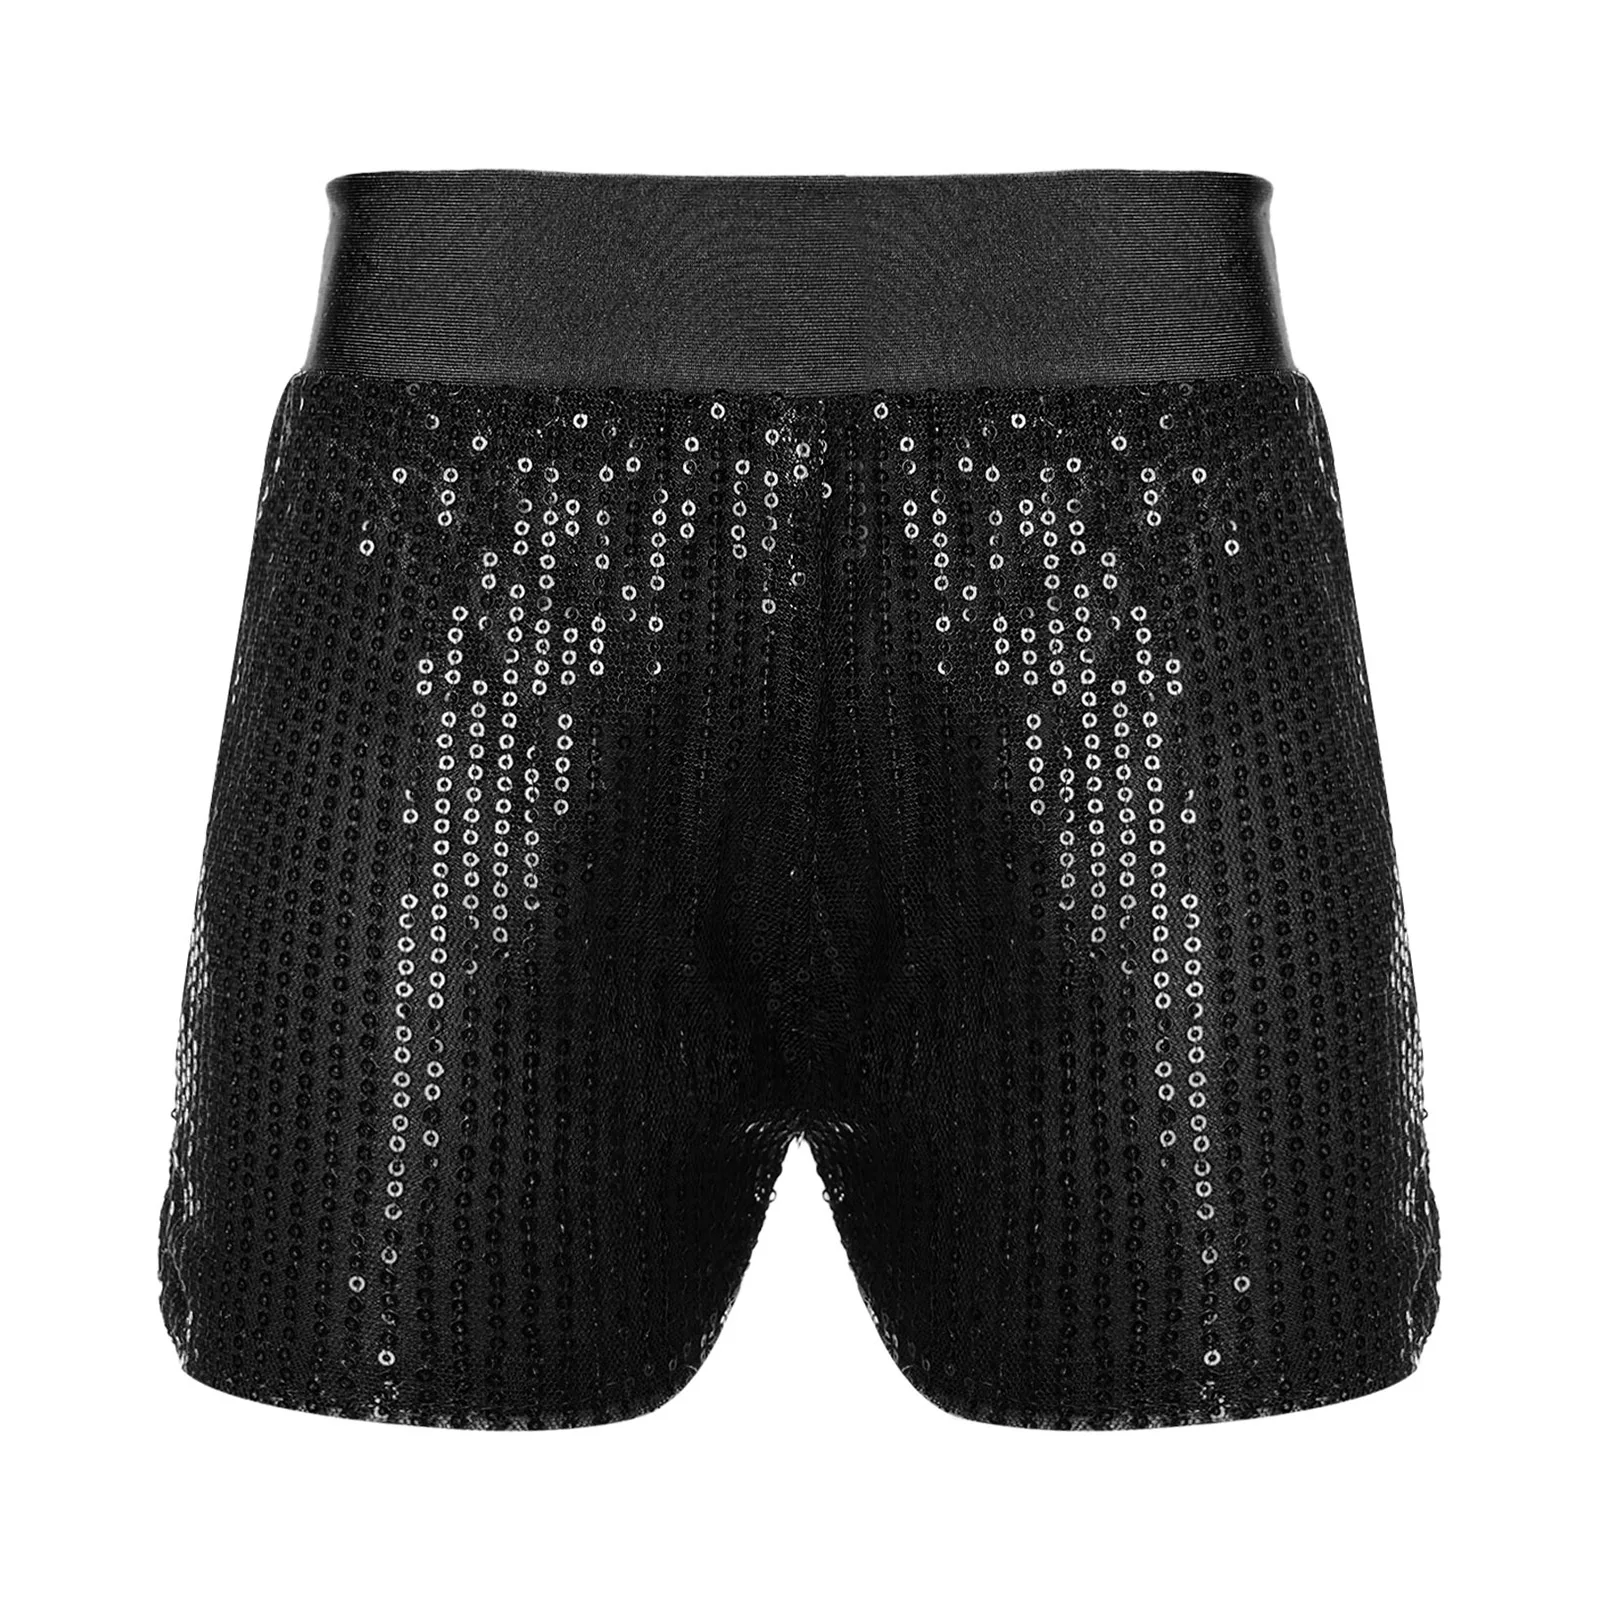 

Kids Girls Sparkling Sequin Dance Shorts Soild Color Elastic Waist Lined Shorts Dance Costumes for Jazz Disco Stage Performance